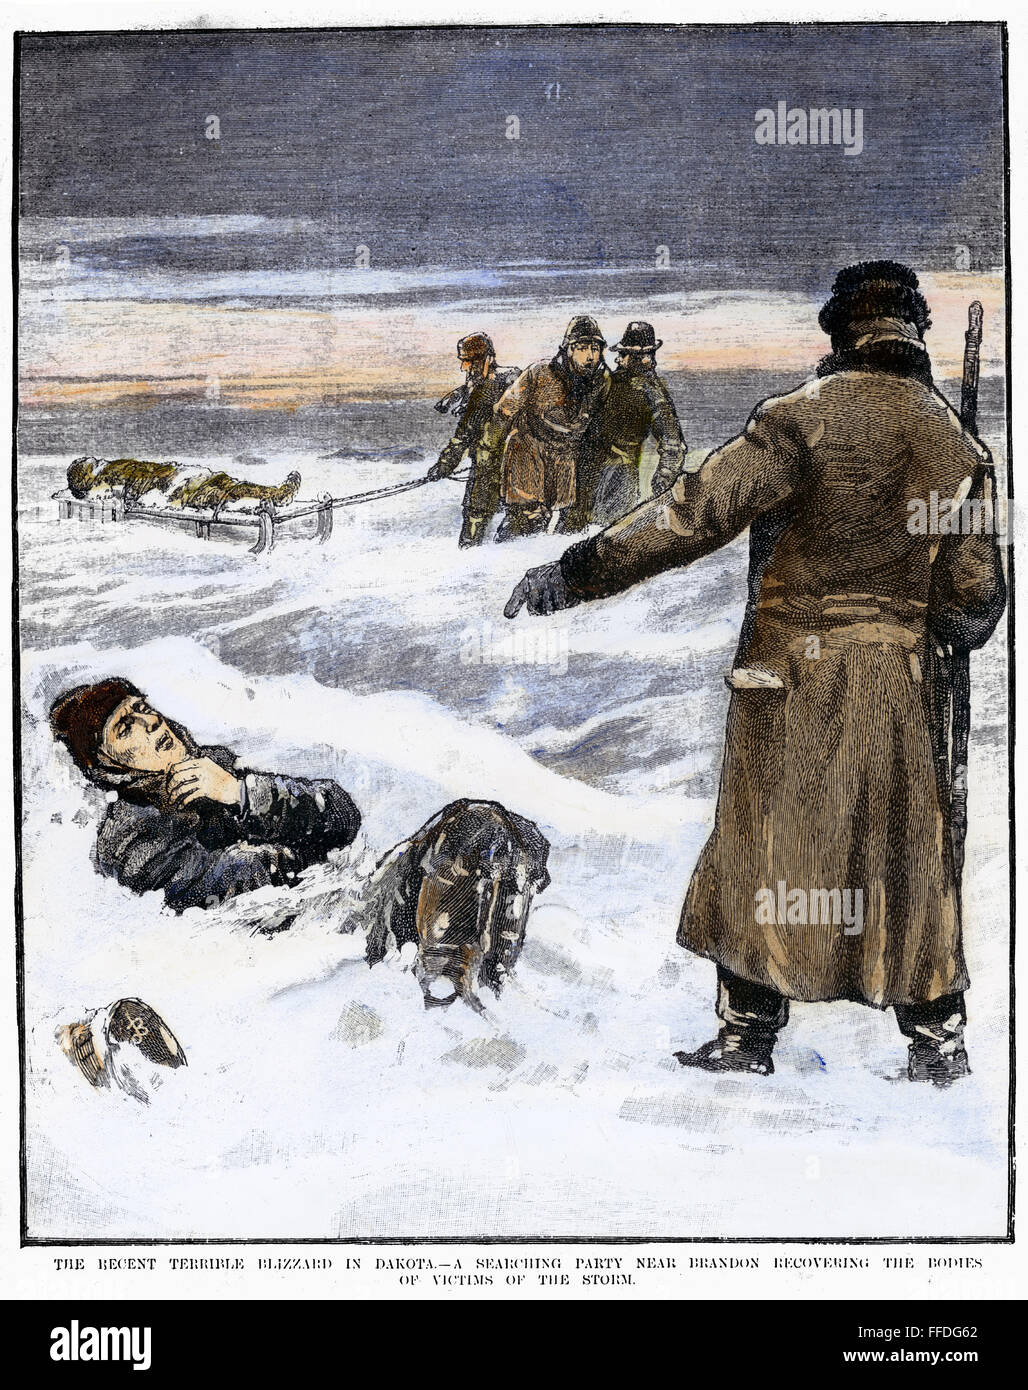 DAKOTA BLIZZARD, 1888. /nA search party near Brandon (present-day South Dakota) pulling corpses from the snow following the blizzard of January 1888 in the Dakota Territory. Contemporary American wood engraving. Stock Photo